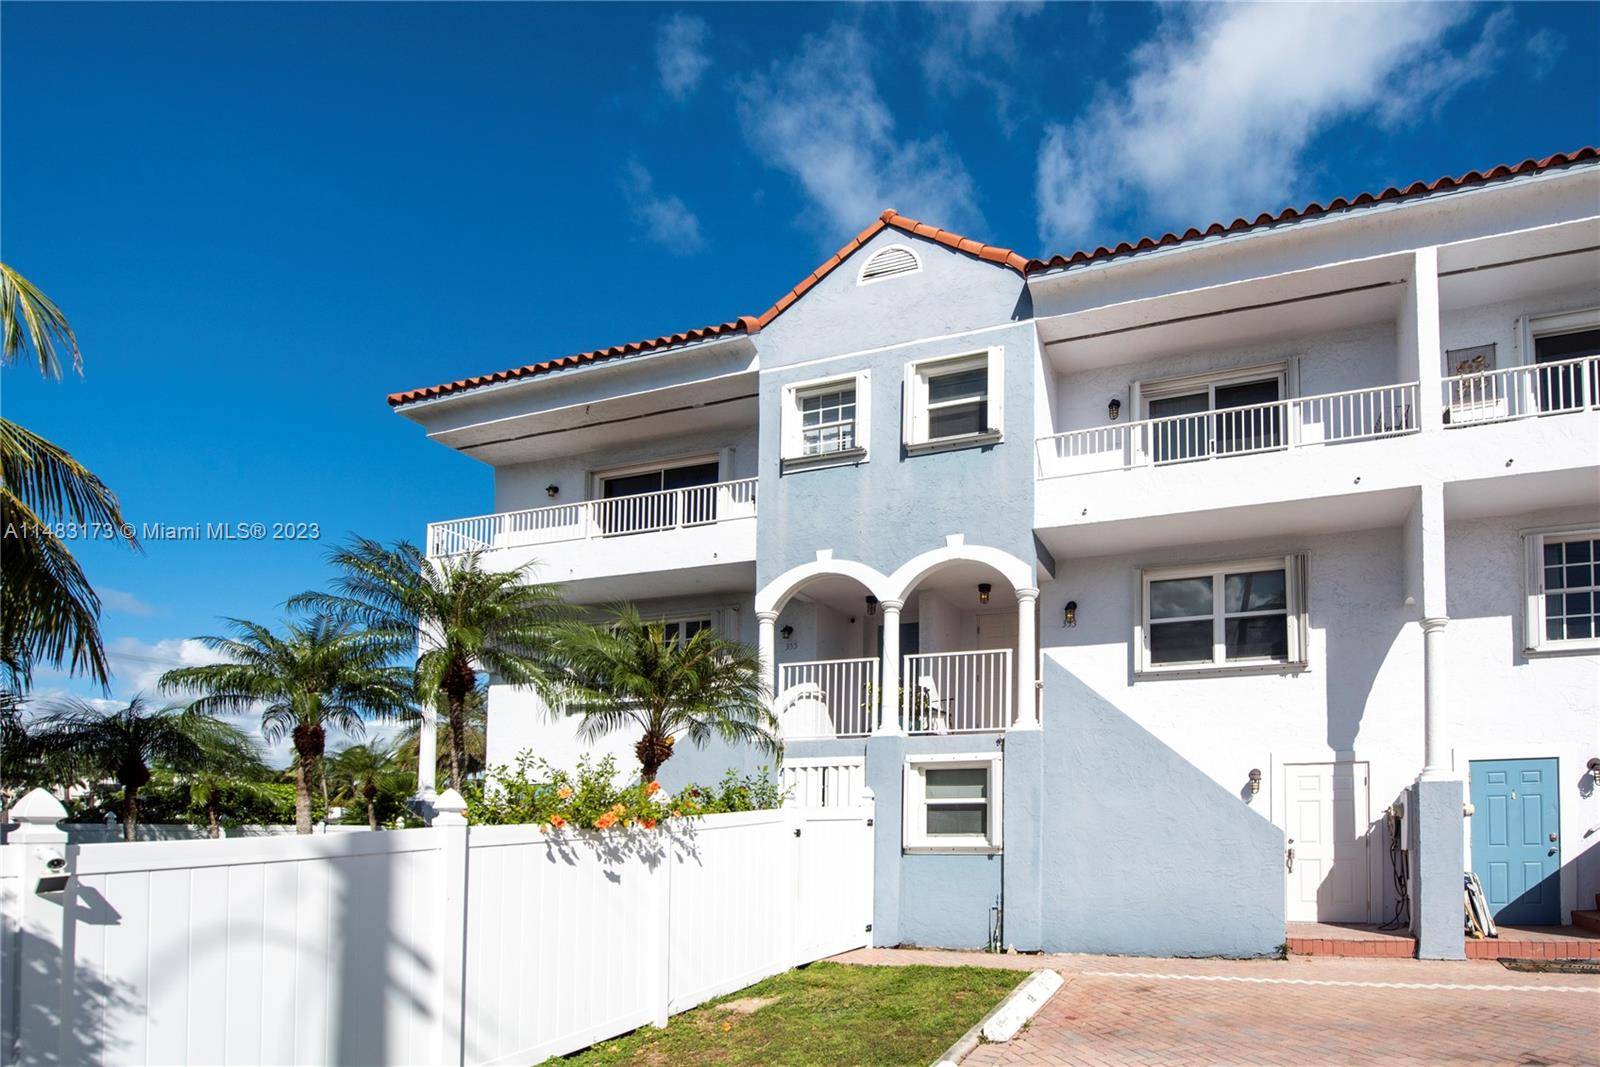 Stunning beachside townhome with three bedrooms, three bathrooms, and an open den area.